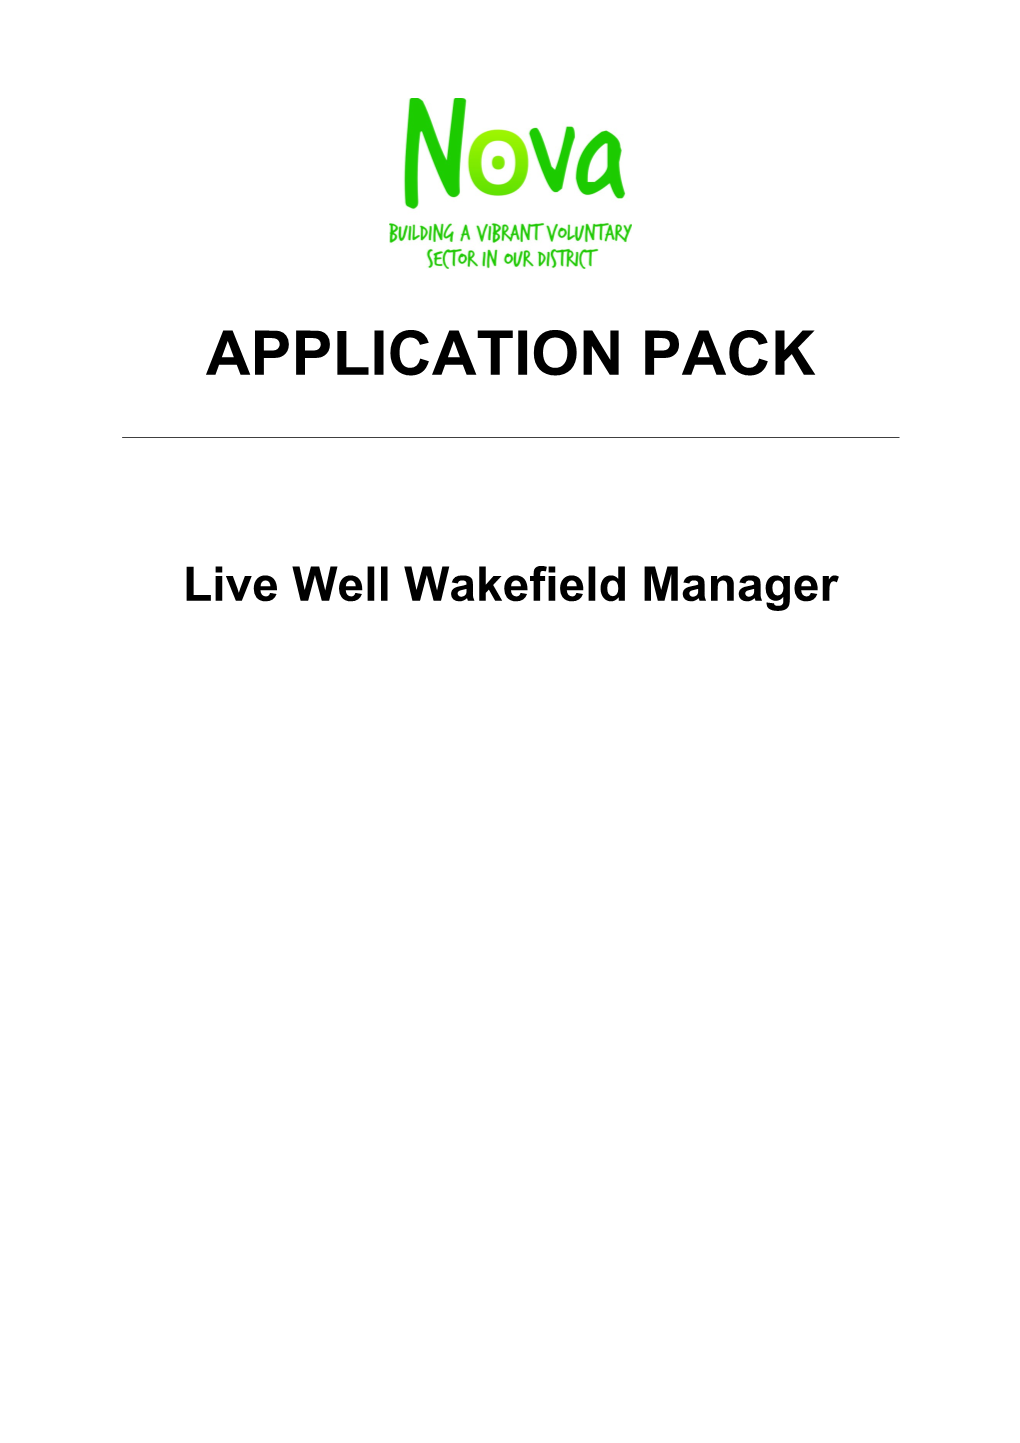 Live Well Wakefield Manager